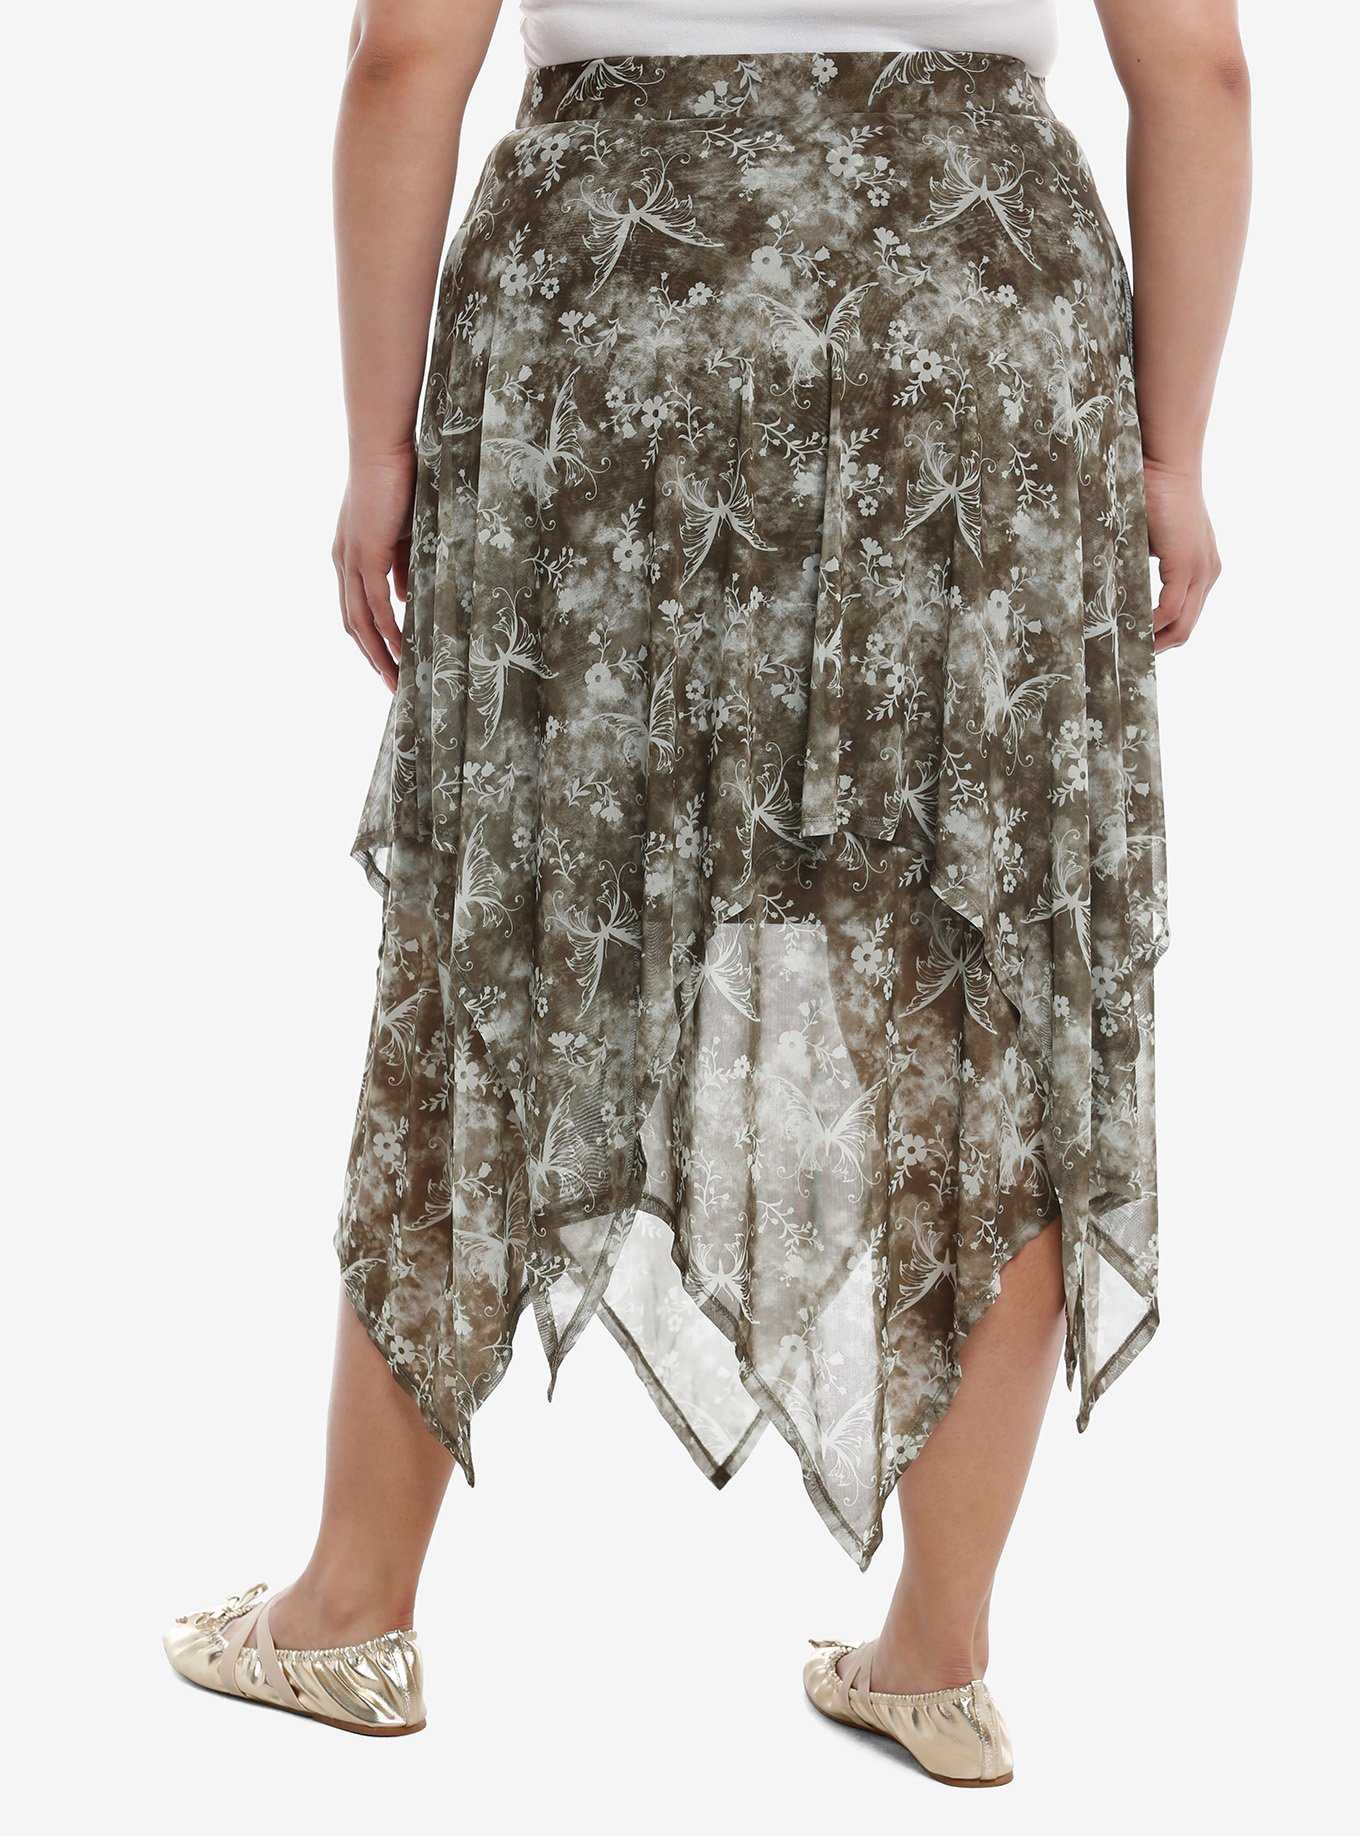 Thorn & Fable Butterfly Sage Tie-Dye Hanky Hem Skirt Plus Size, , hi-res